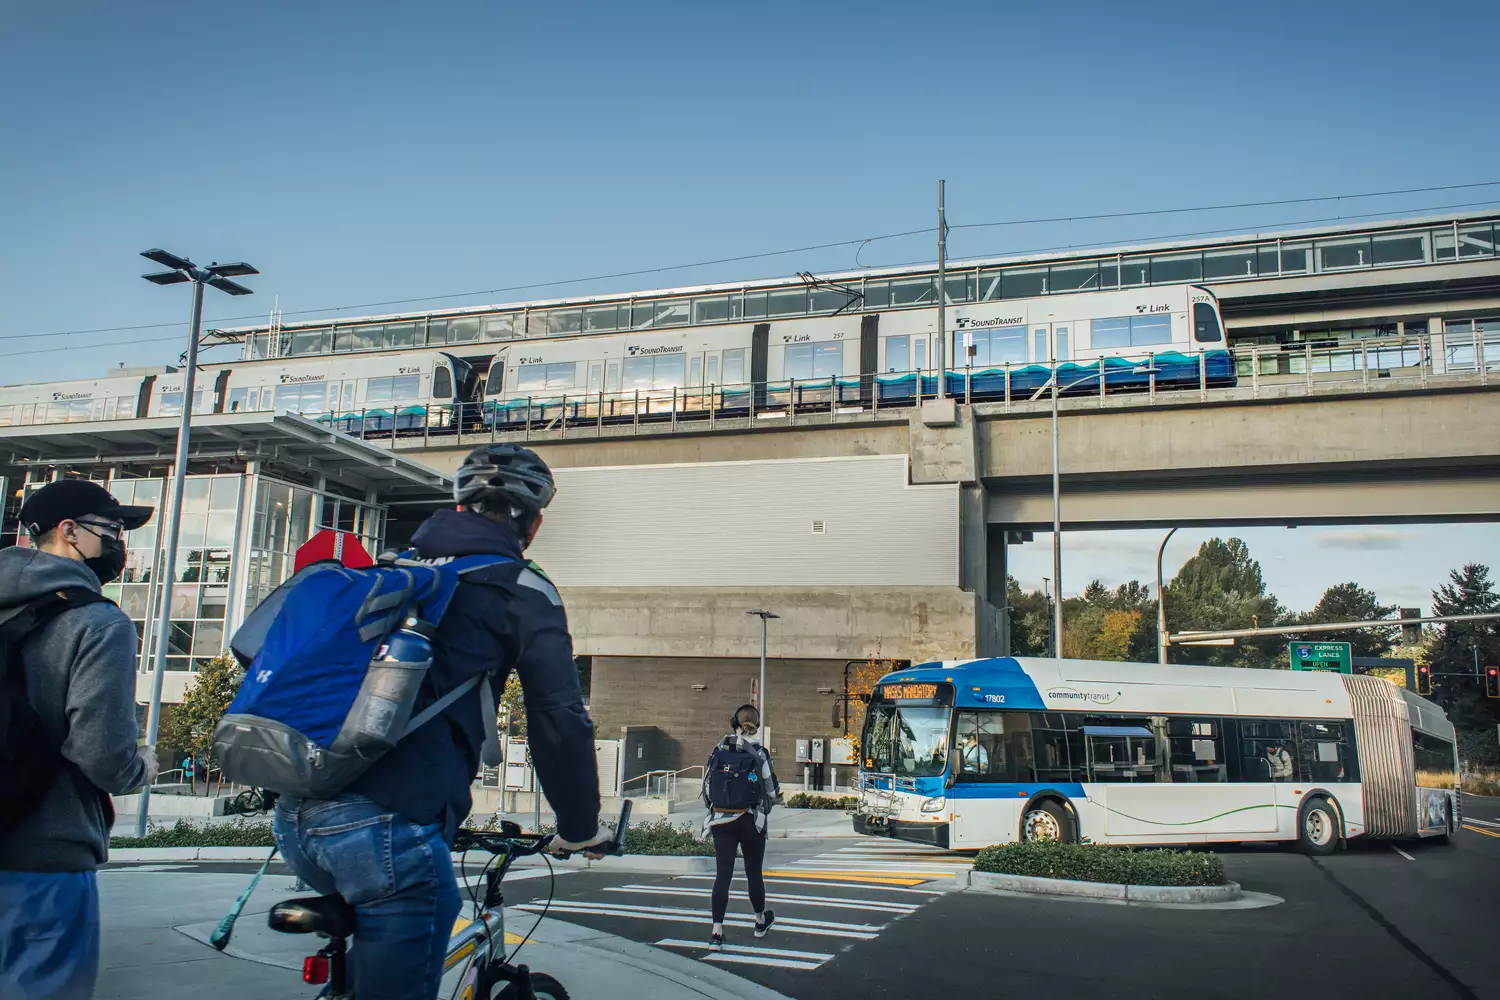 A biker connects to light rail.